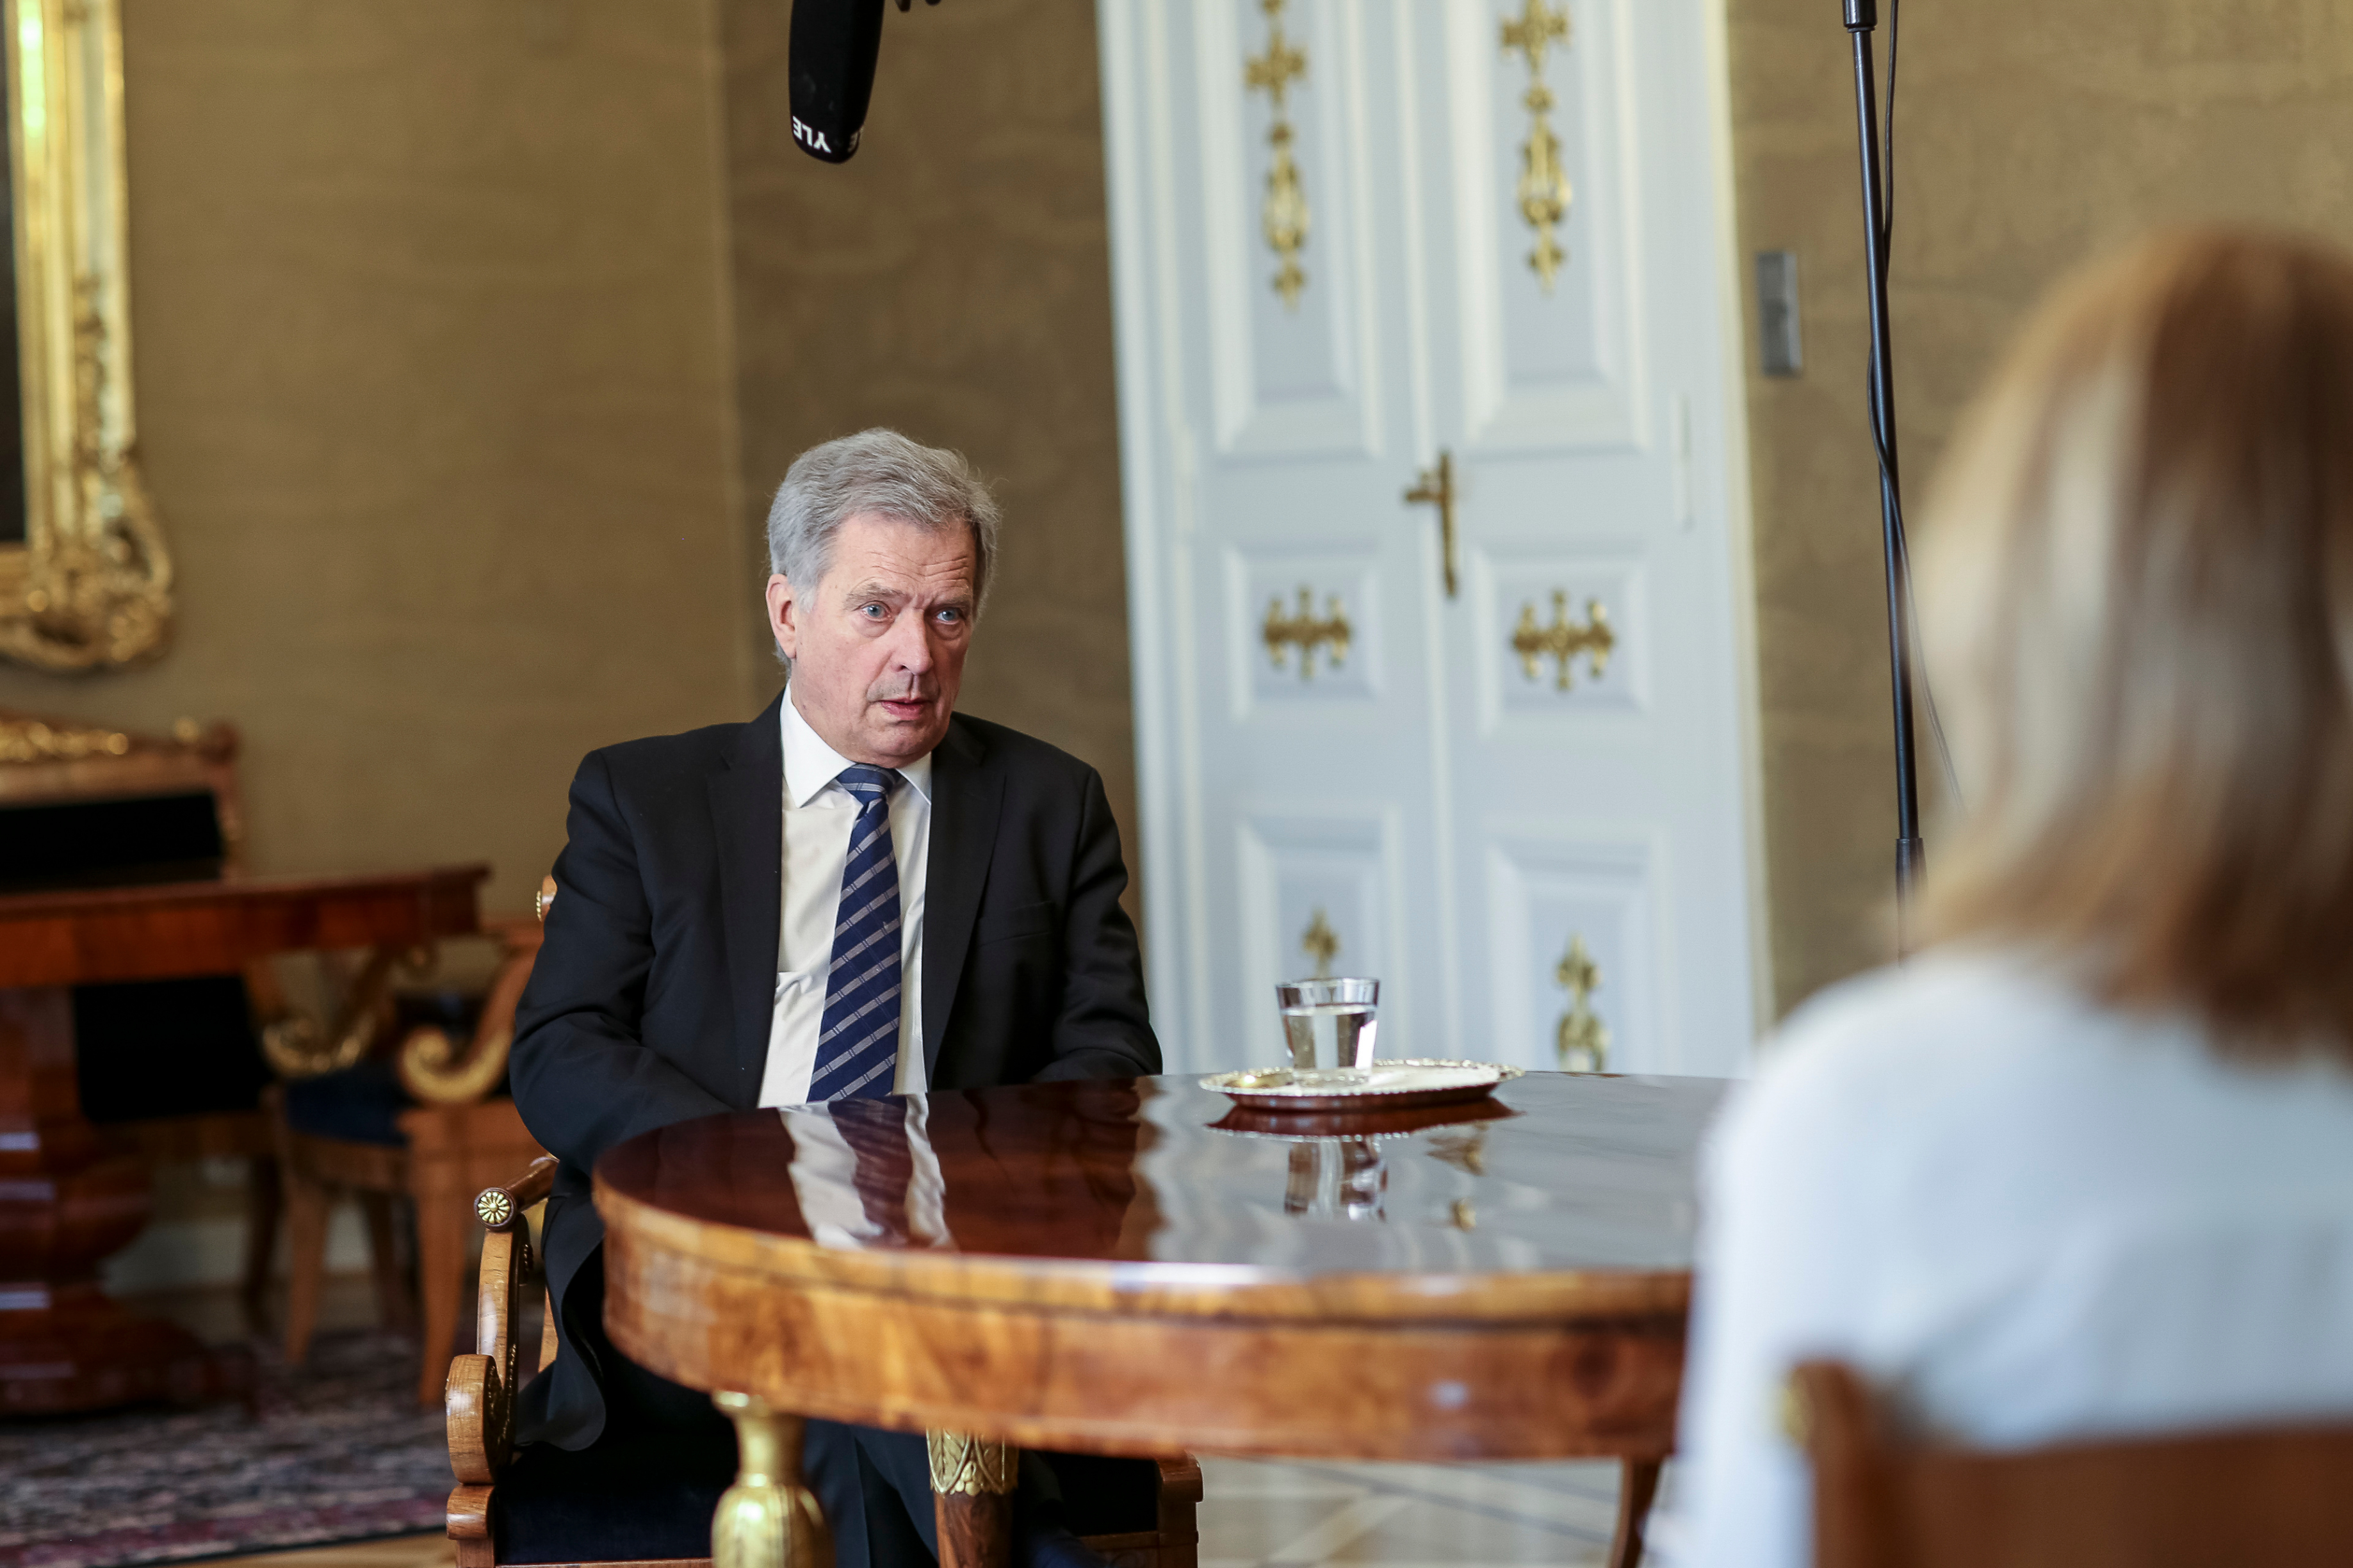 Niinistö proposes the 2025 Helsinki Summit to resolve climate and security issues